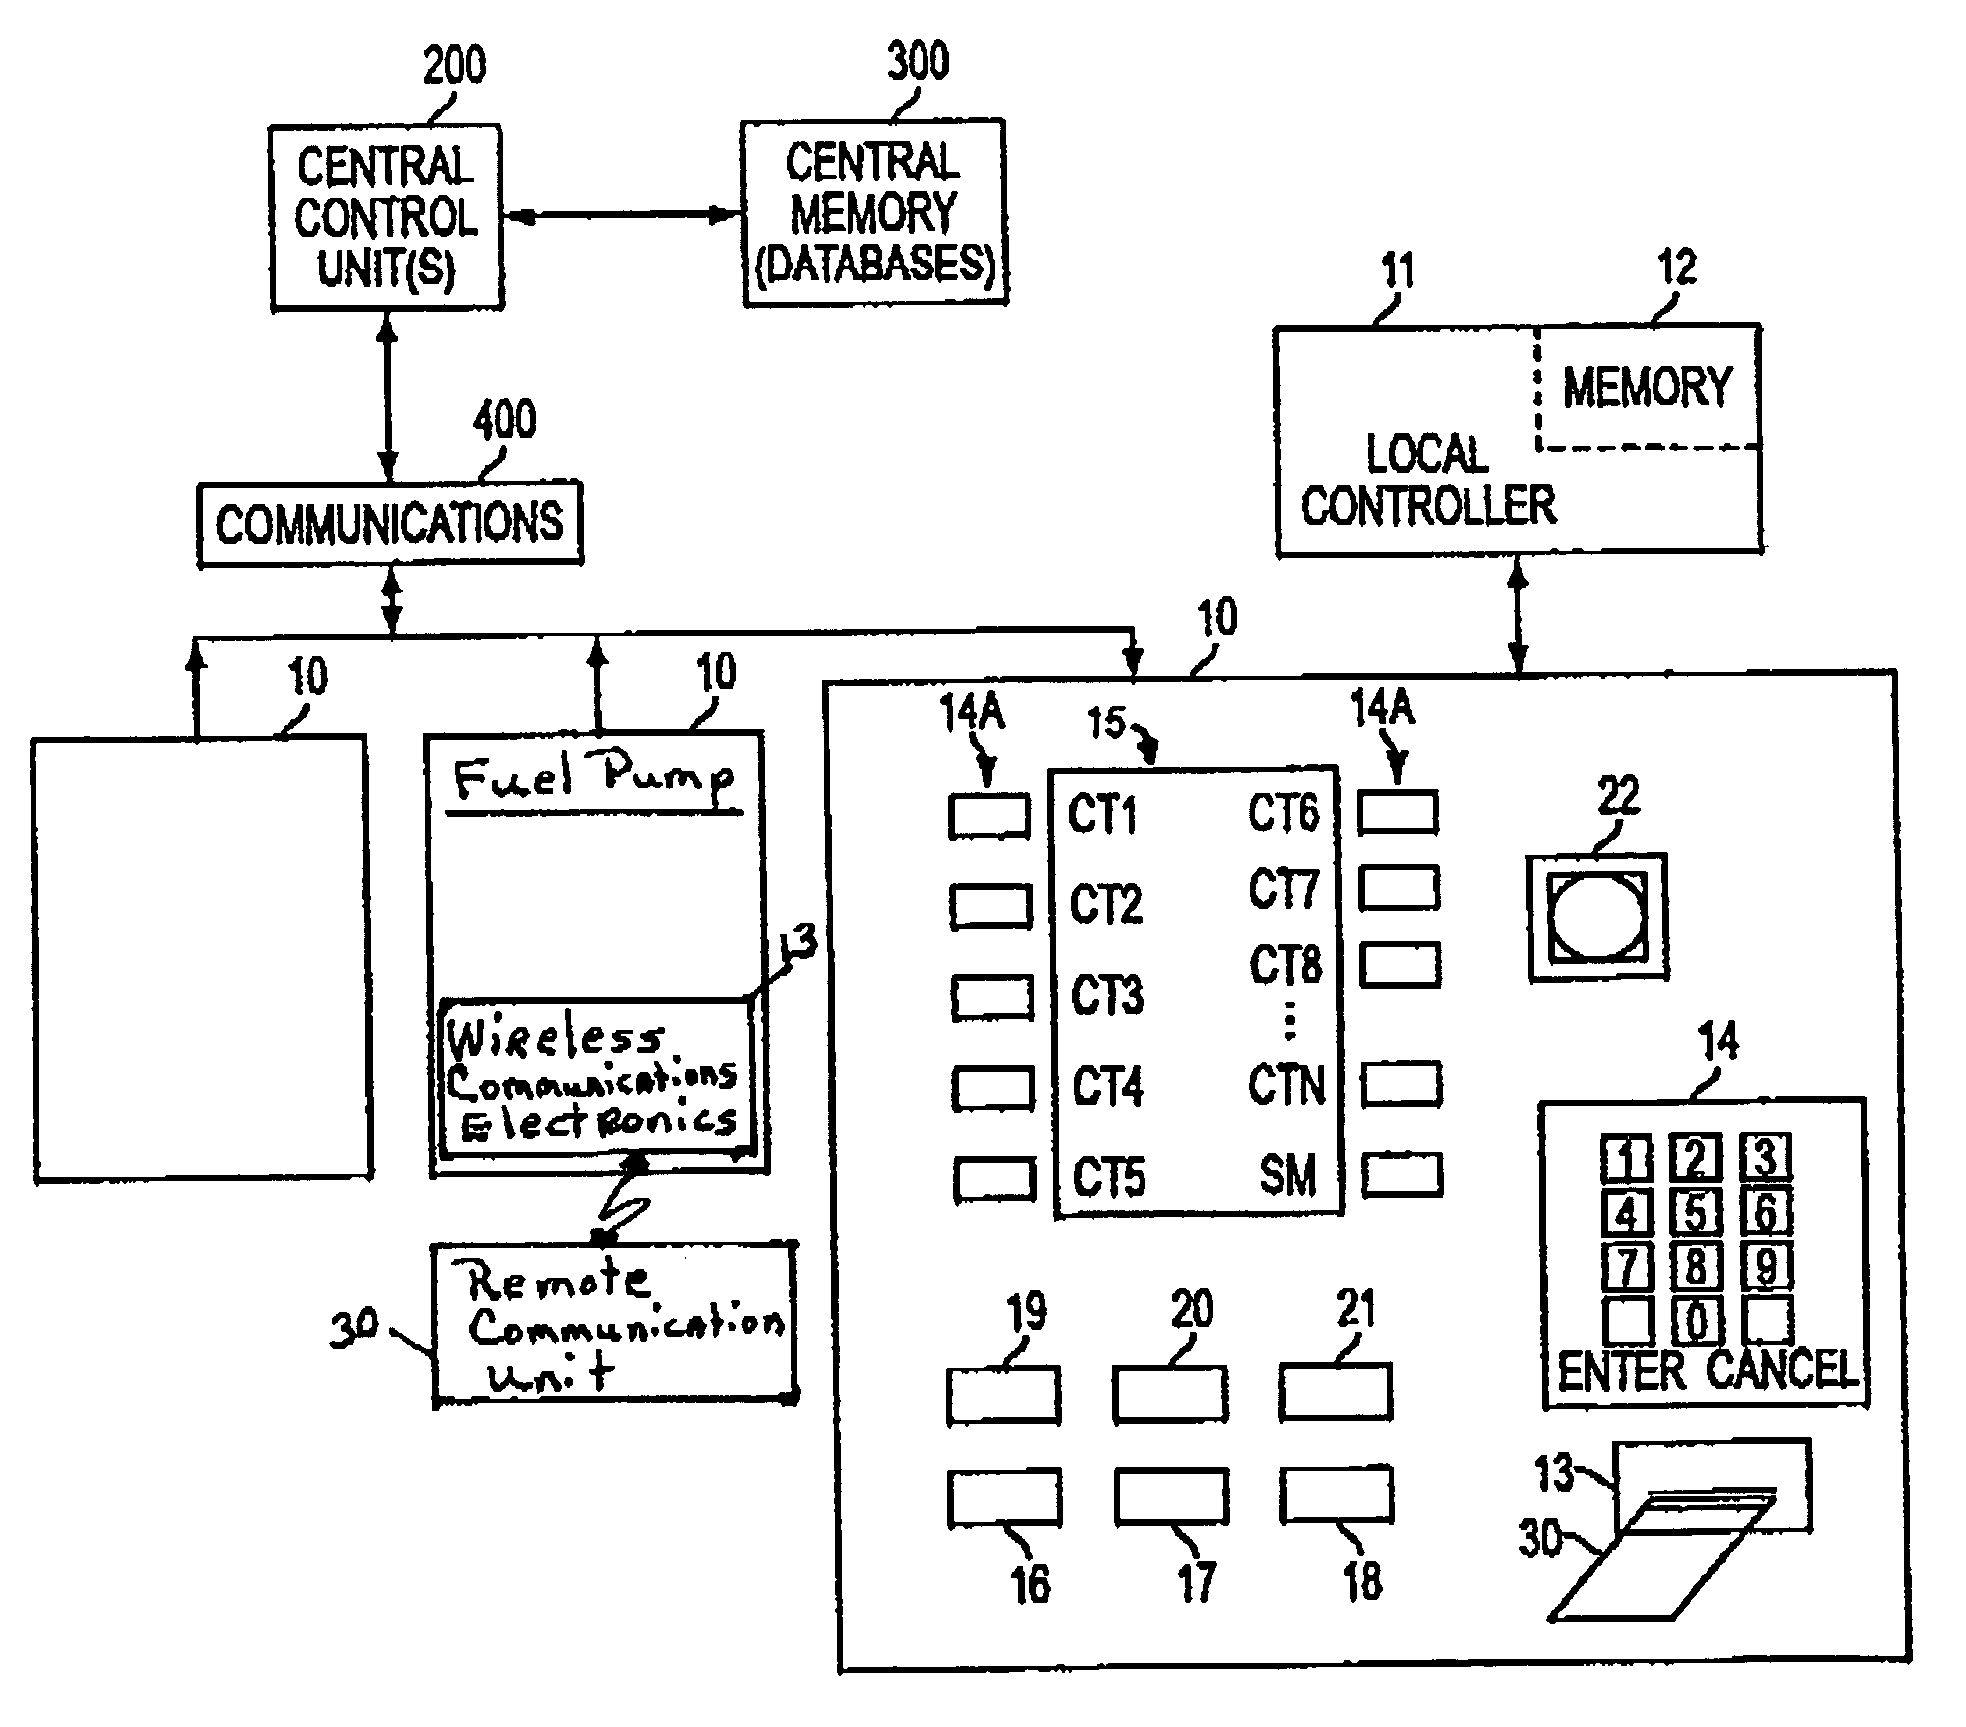 Electronic fund transfer or transaction system